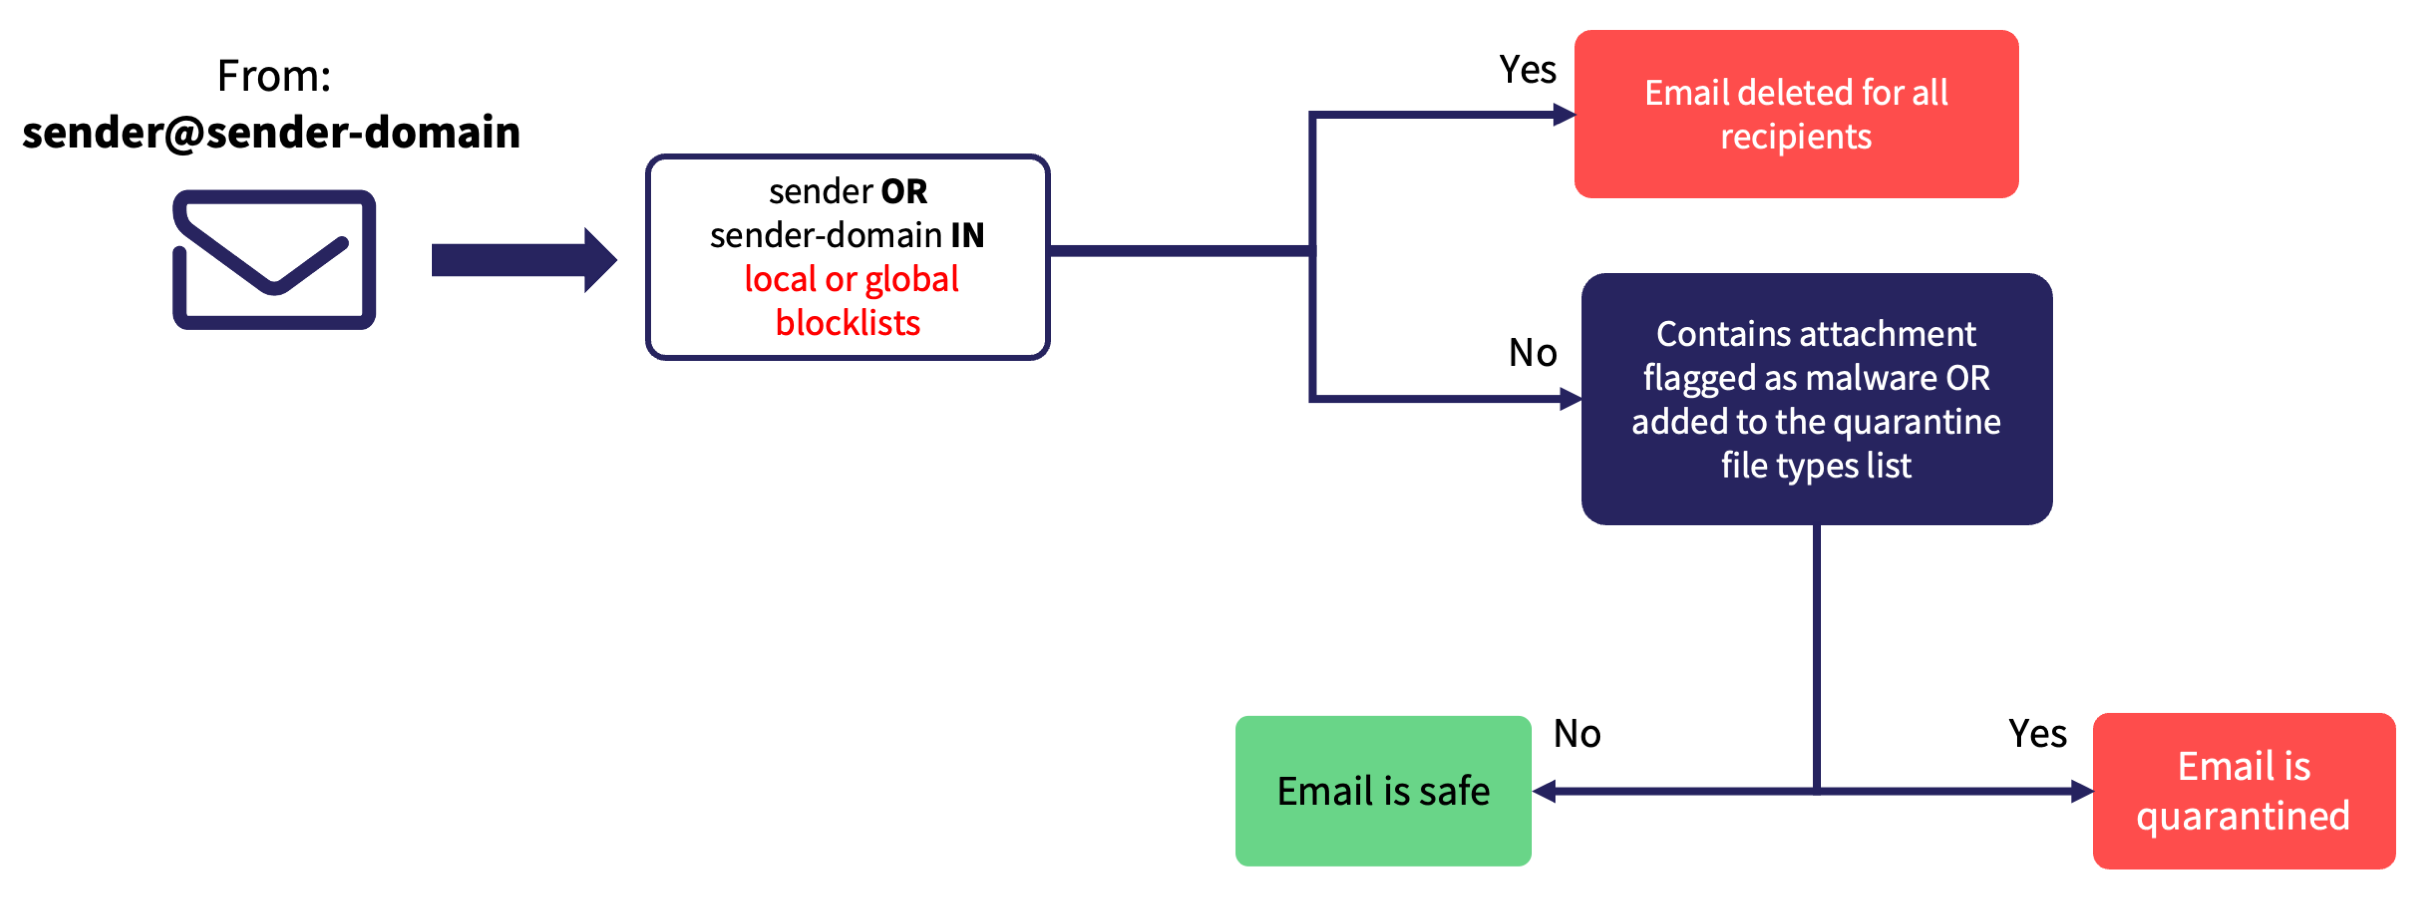 Malware in email attachment inspection process